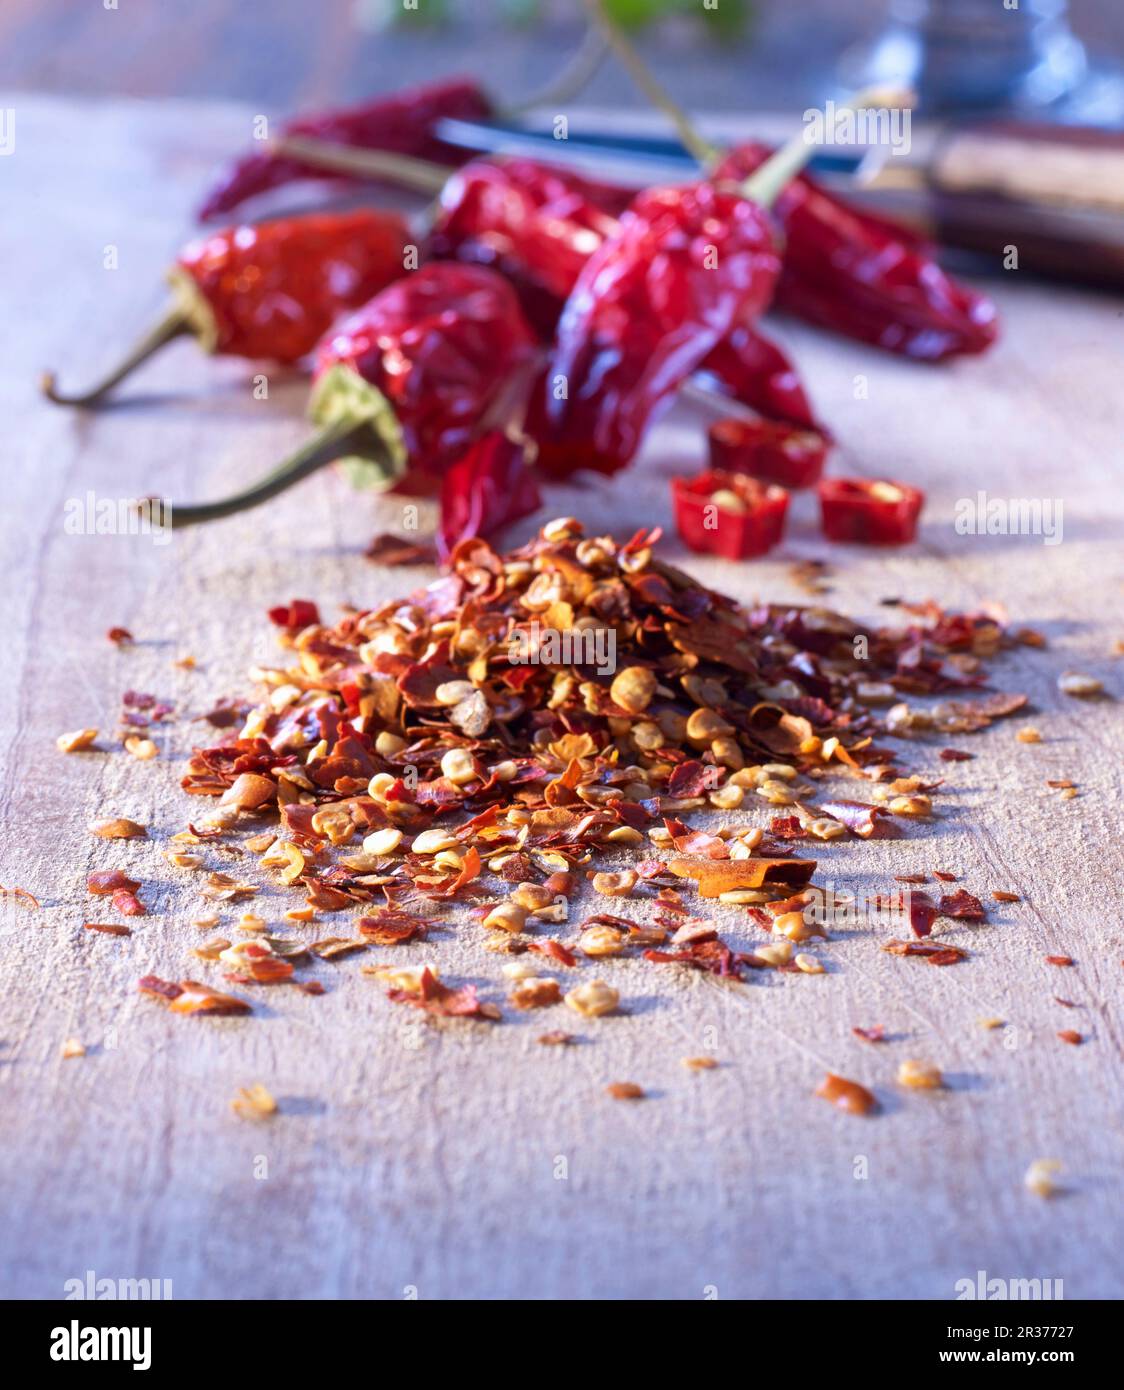 Crushed chillies on a wooden board Stock Photo